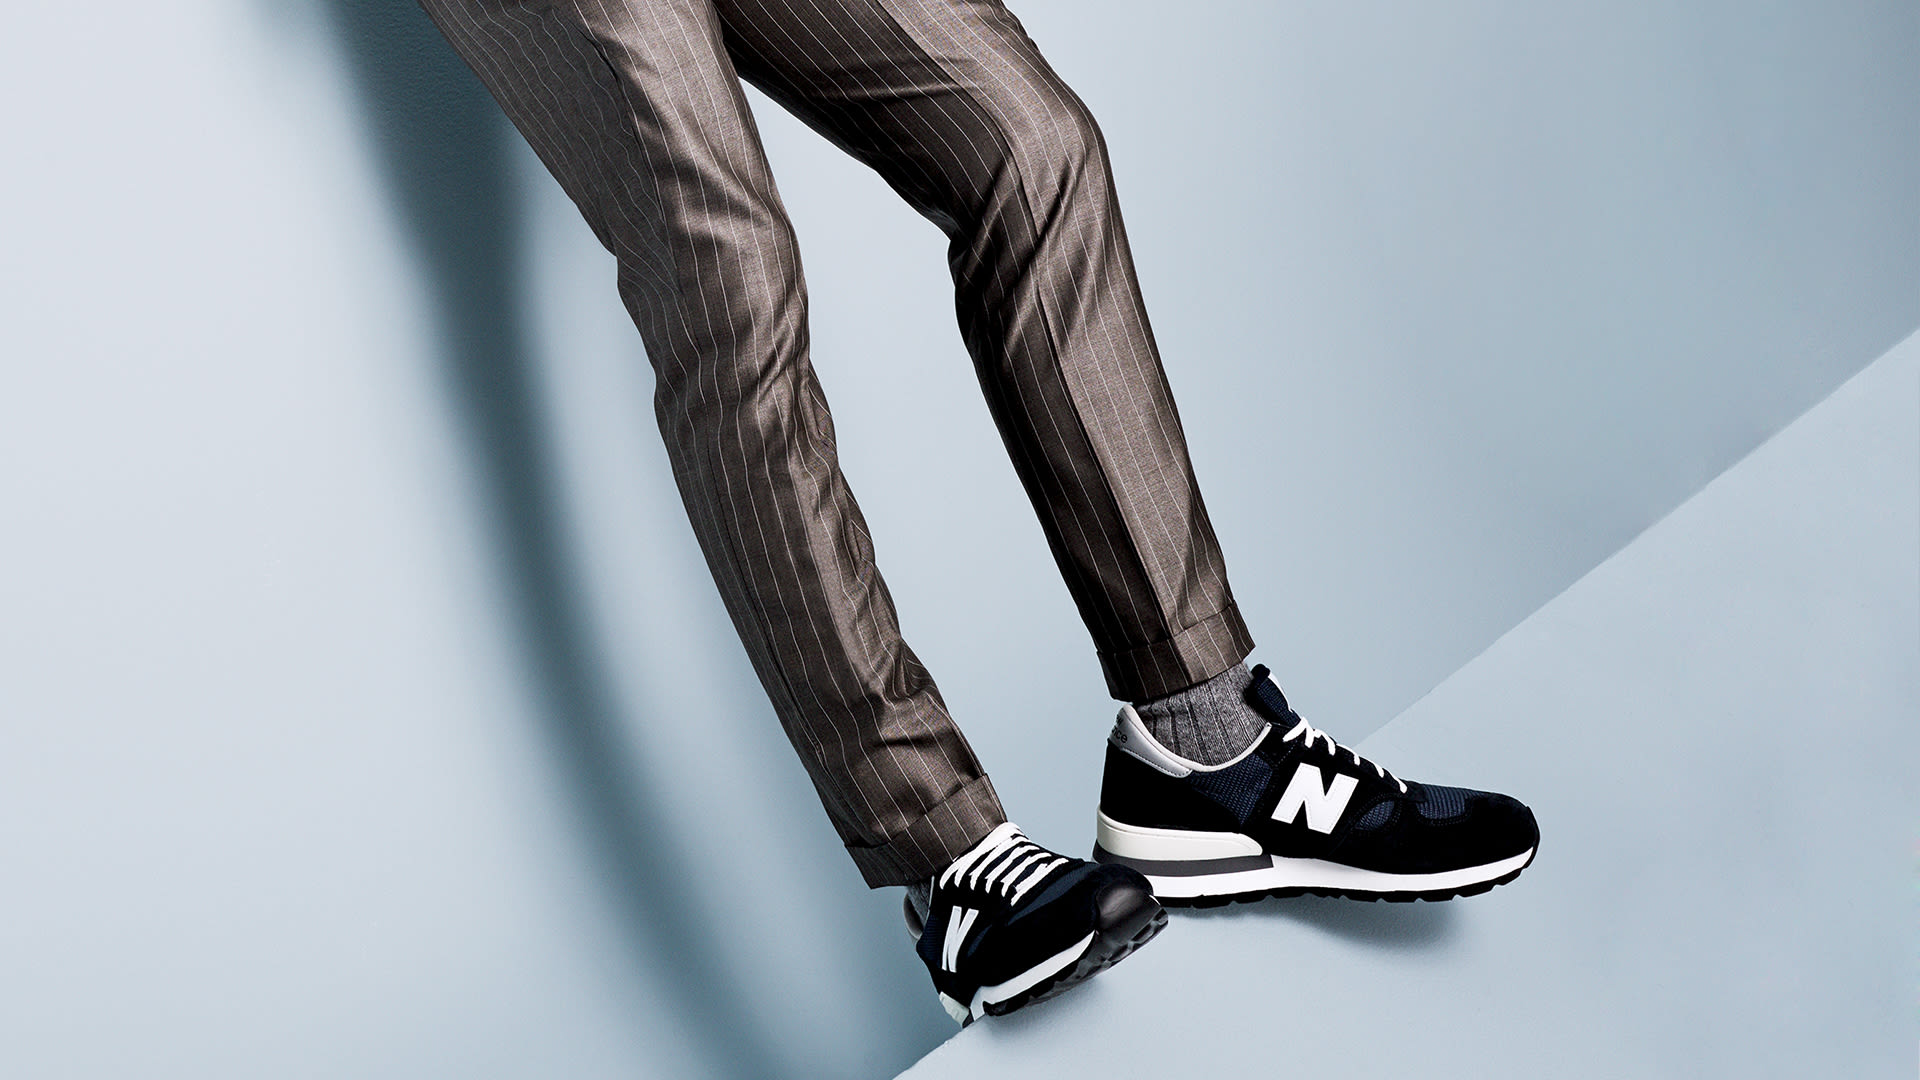 The Right Way to Wear a Suit With Sneakers- 3 Tips for Suits With Sneakers